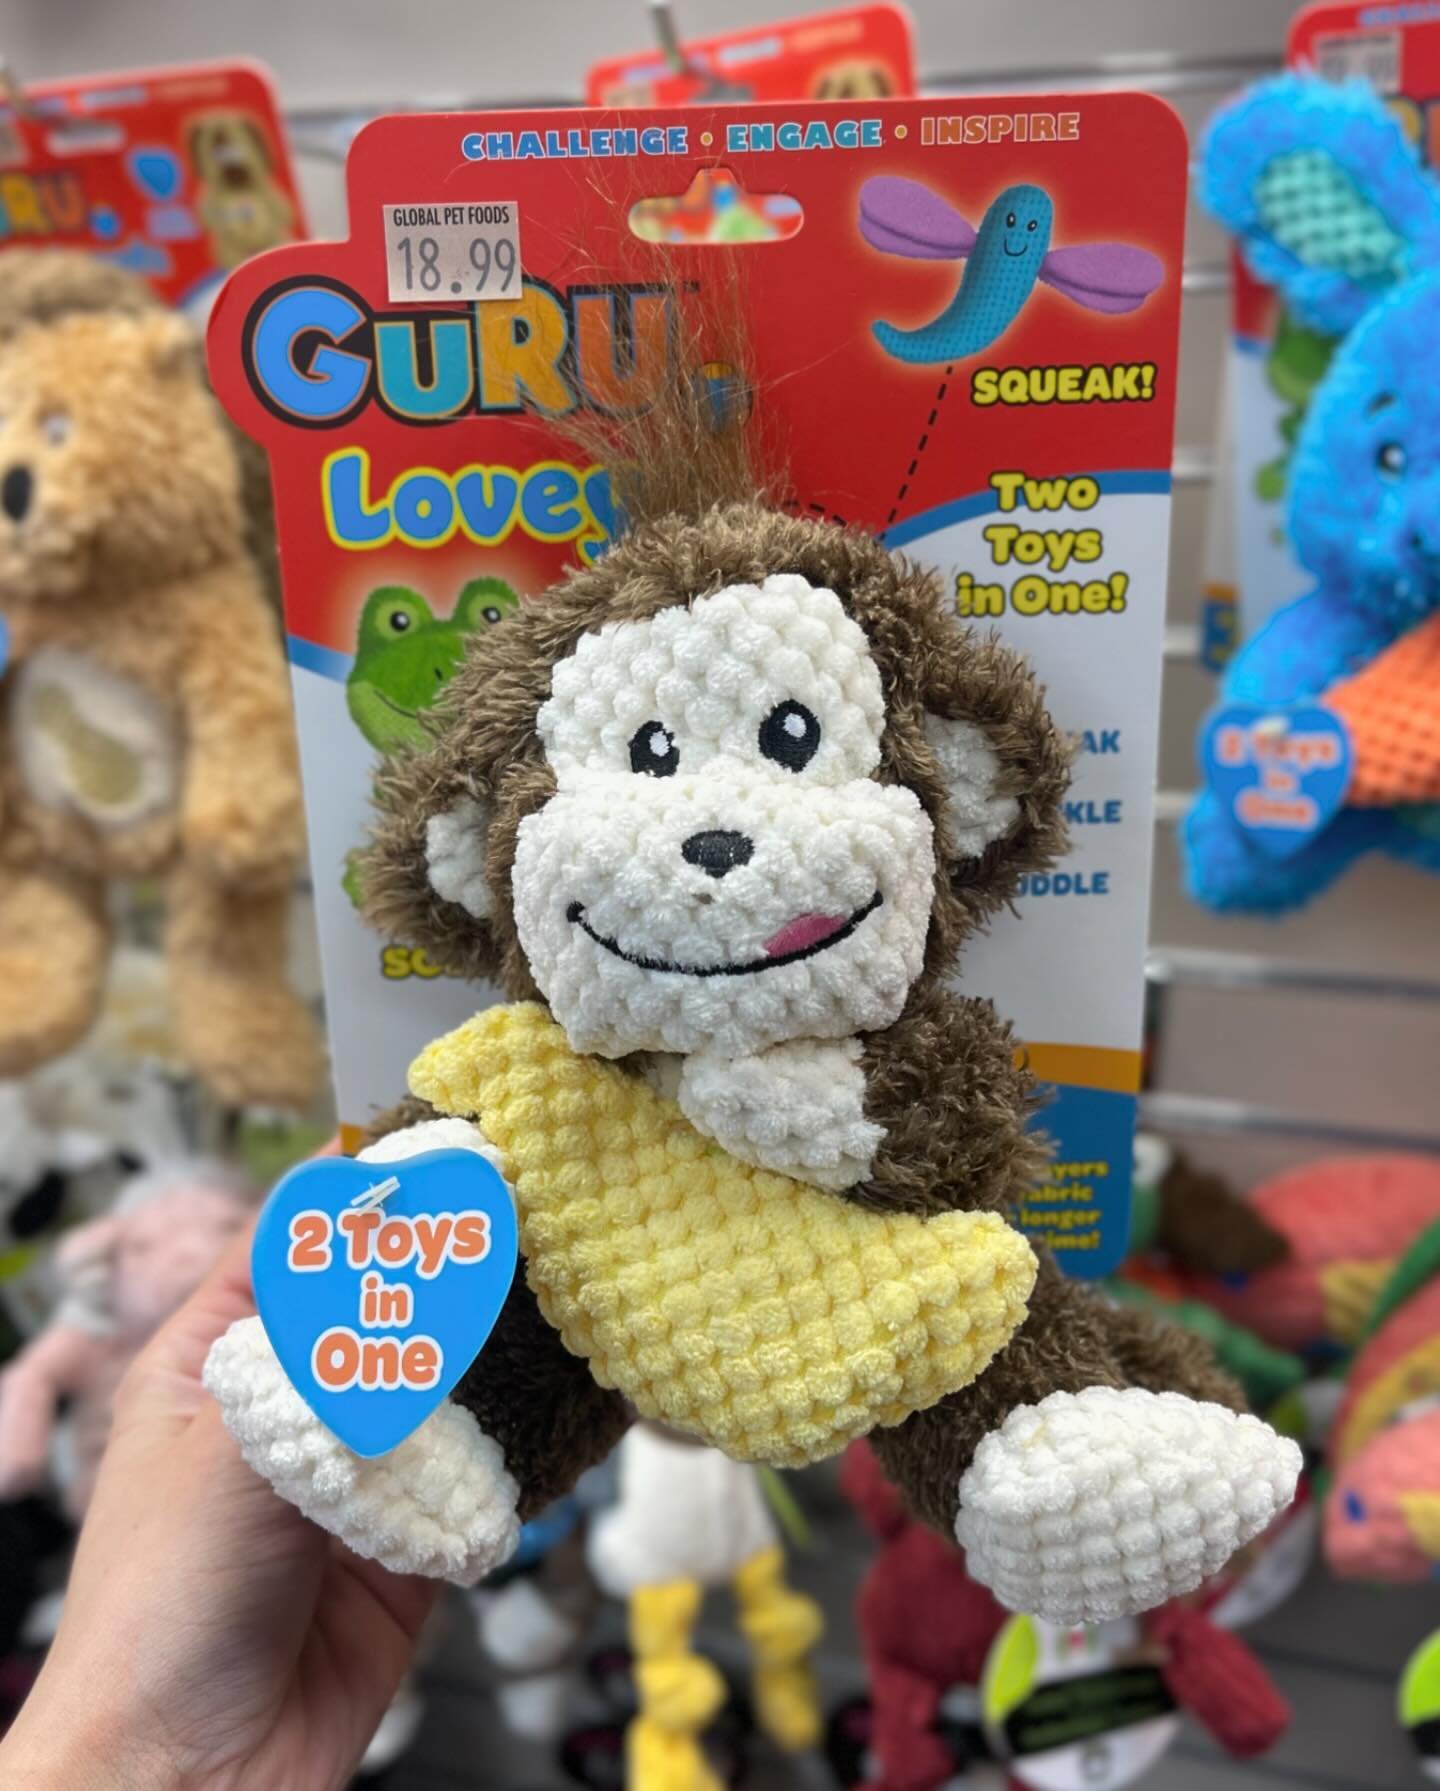 Snuggle up with these adorable plush pals from @gurupetcompany 🐰🐵🐷 Their irresistible softness and sweet scents make every cuddle session extra cozy! Now available at Global Woodstock.⁣
⁣
Which one would your furry friend pick? 🤩⁣
⁣
⁣
⁣
#PetToys 